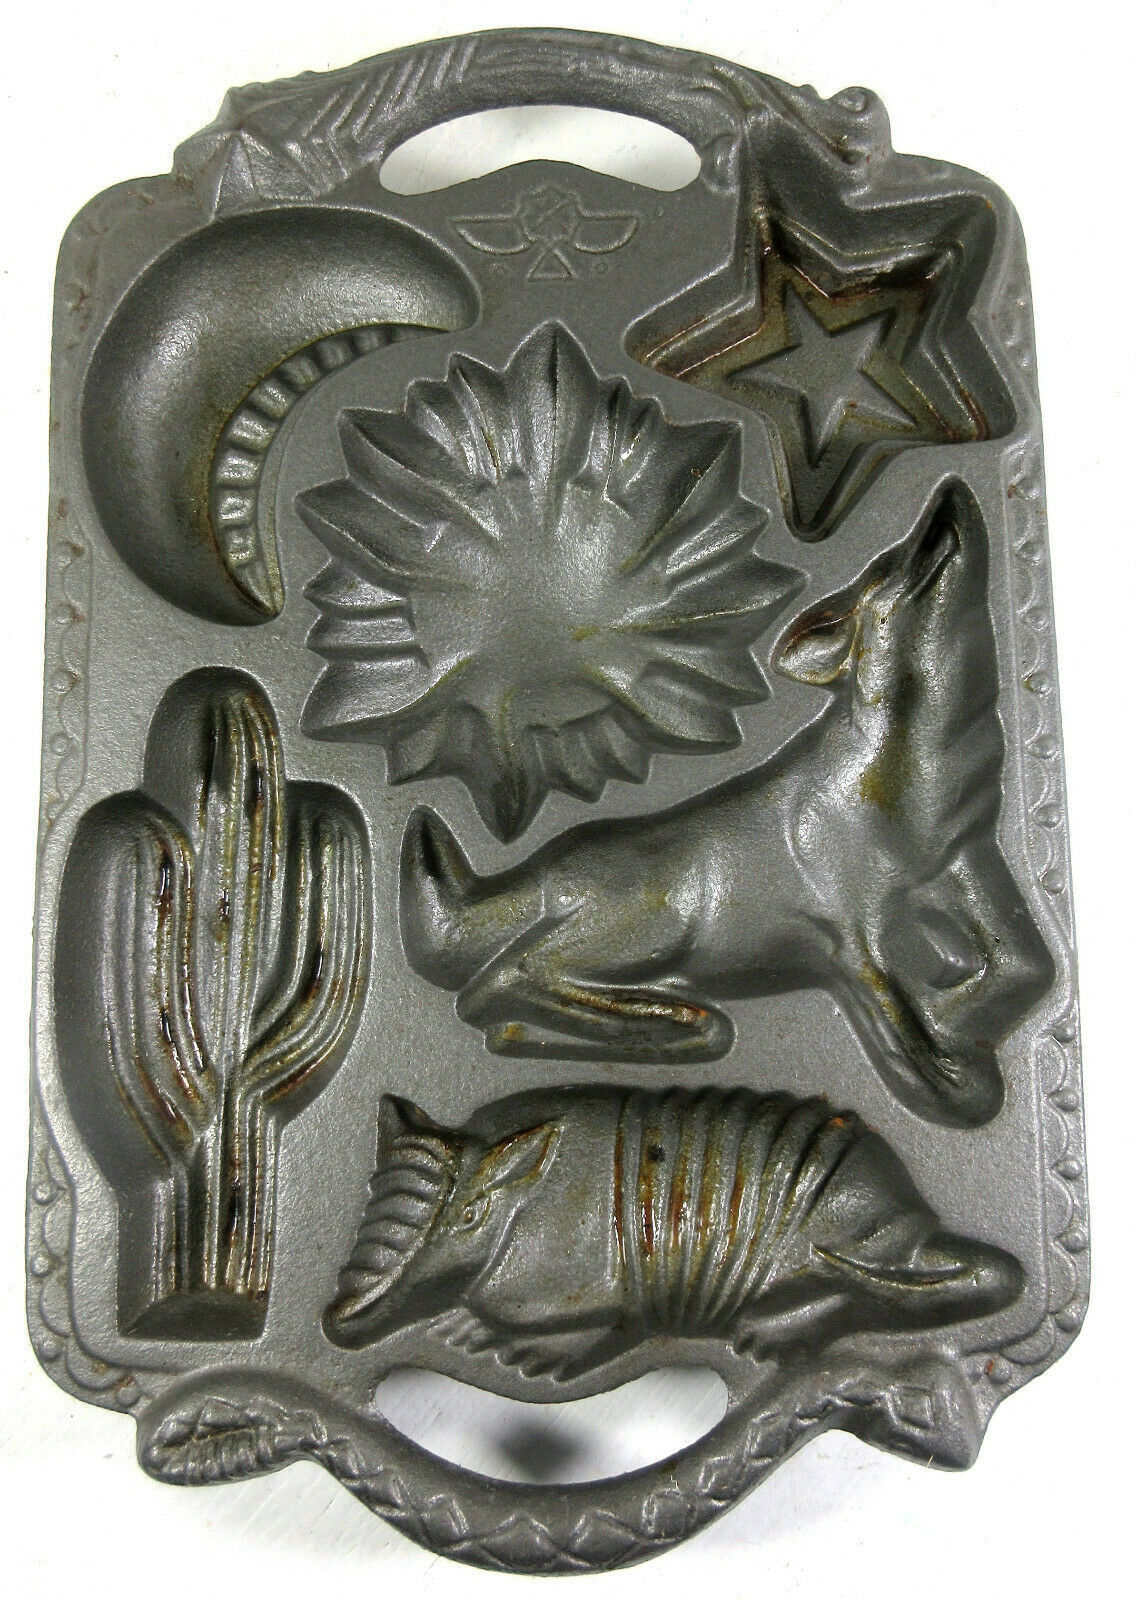 John Wright 1988 Cast Iron Muffin Cookie Mold Southwest Cactus Coyote Sun Moon - $54.40